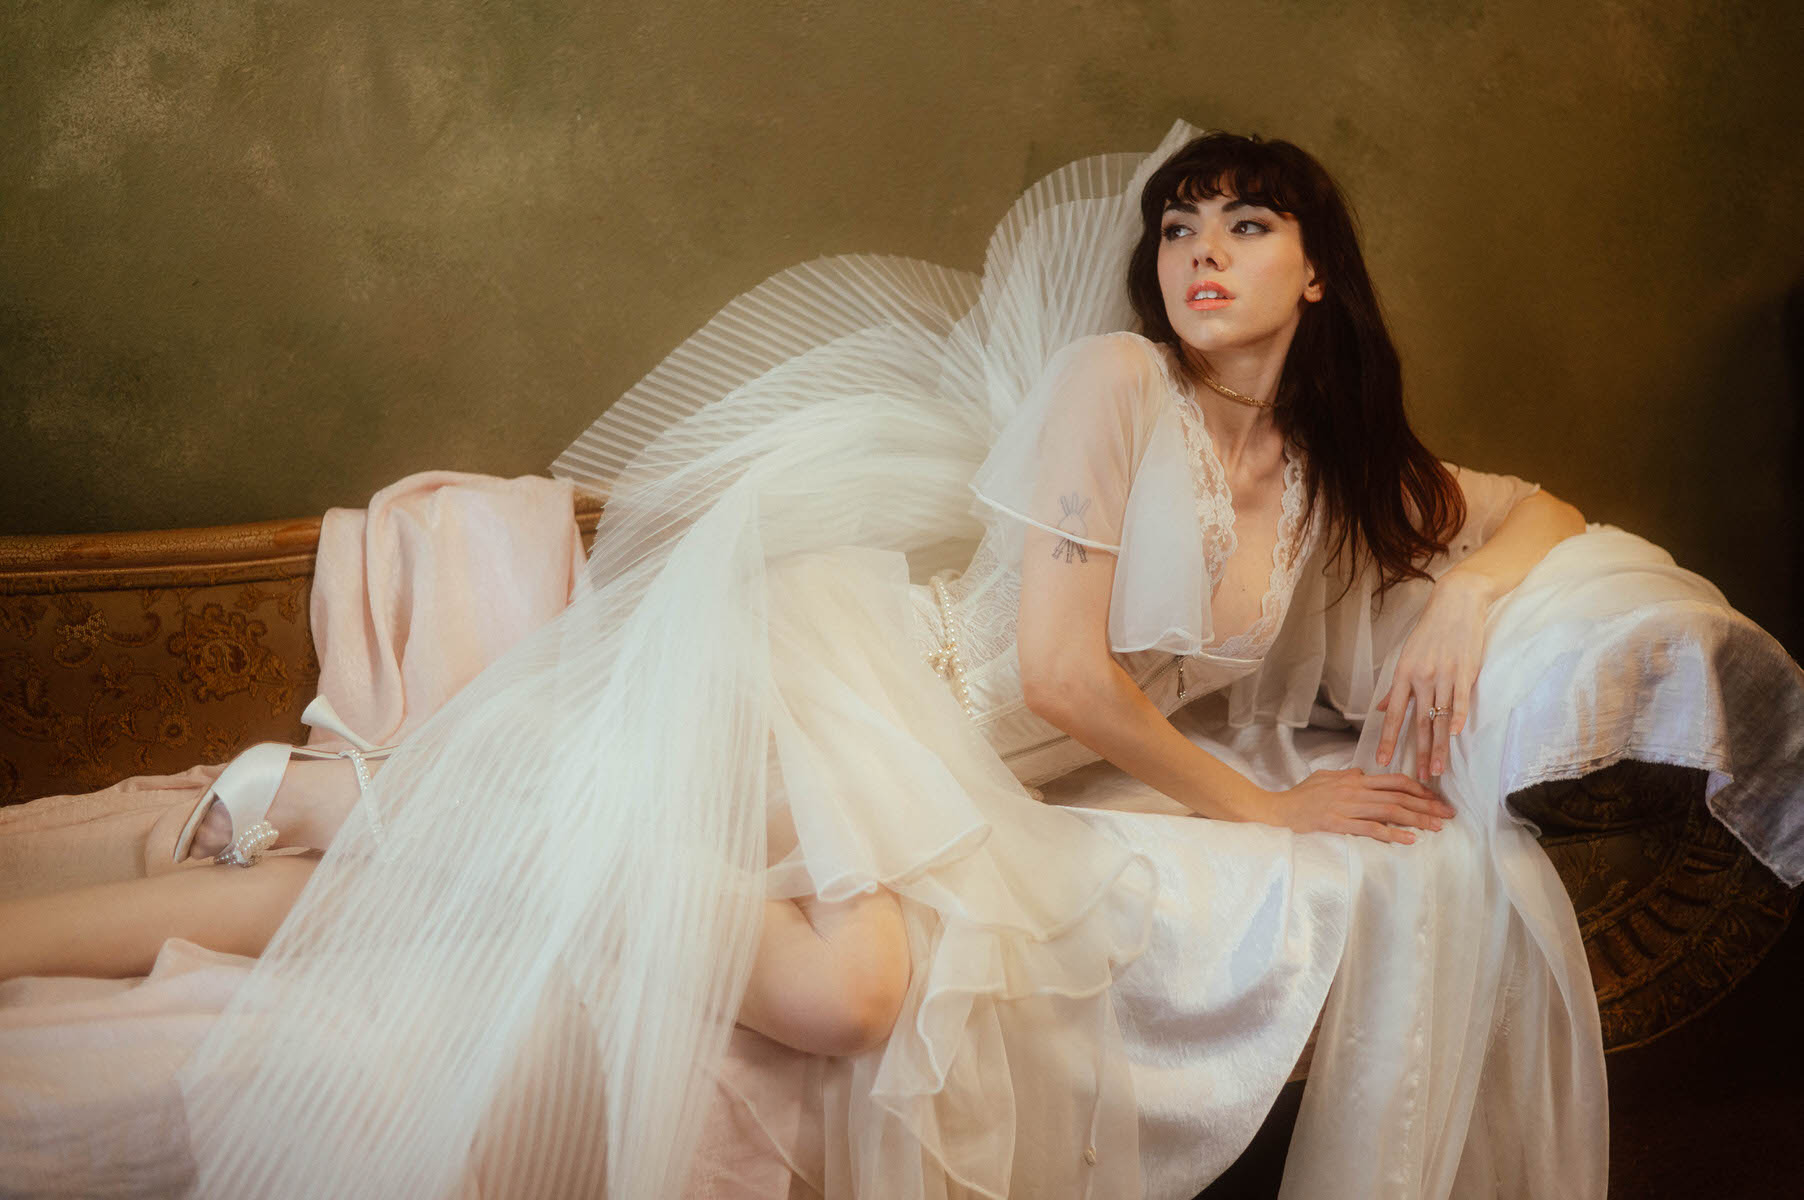 A woman in a vintage white robe outfit with angel wings reclining elegantly on an antique sofa against a green wall for a boudoir photoshoot.